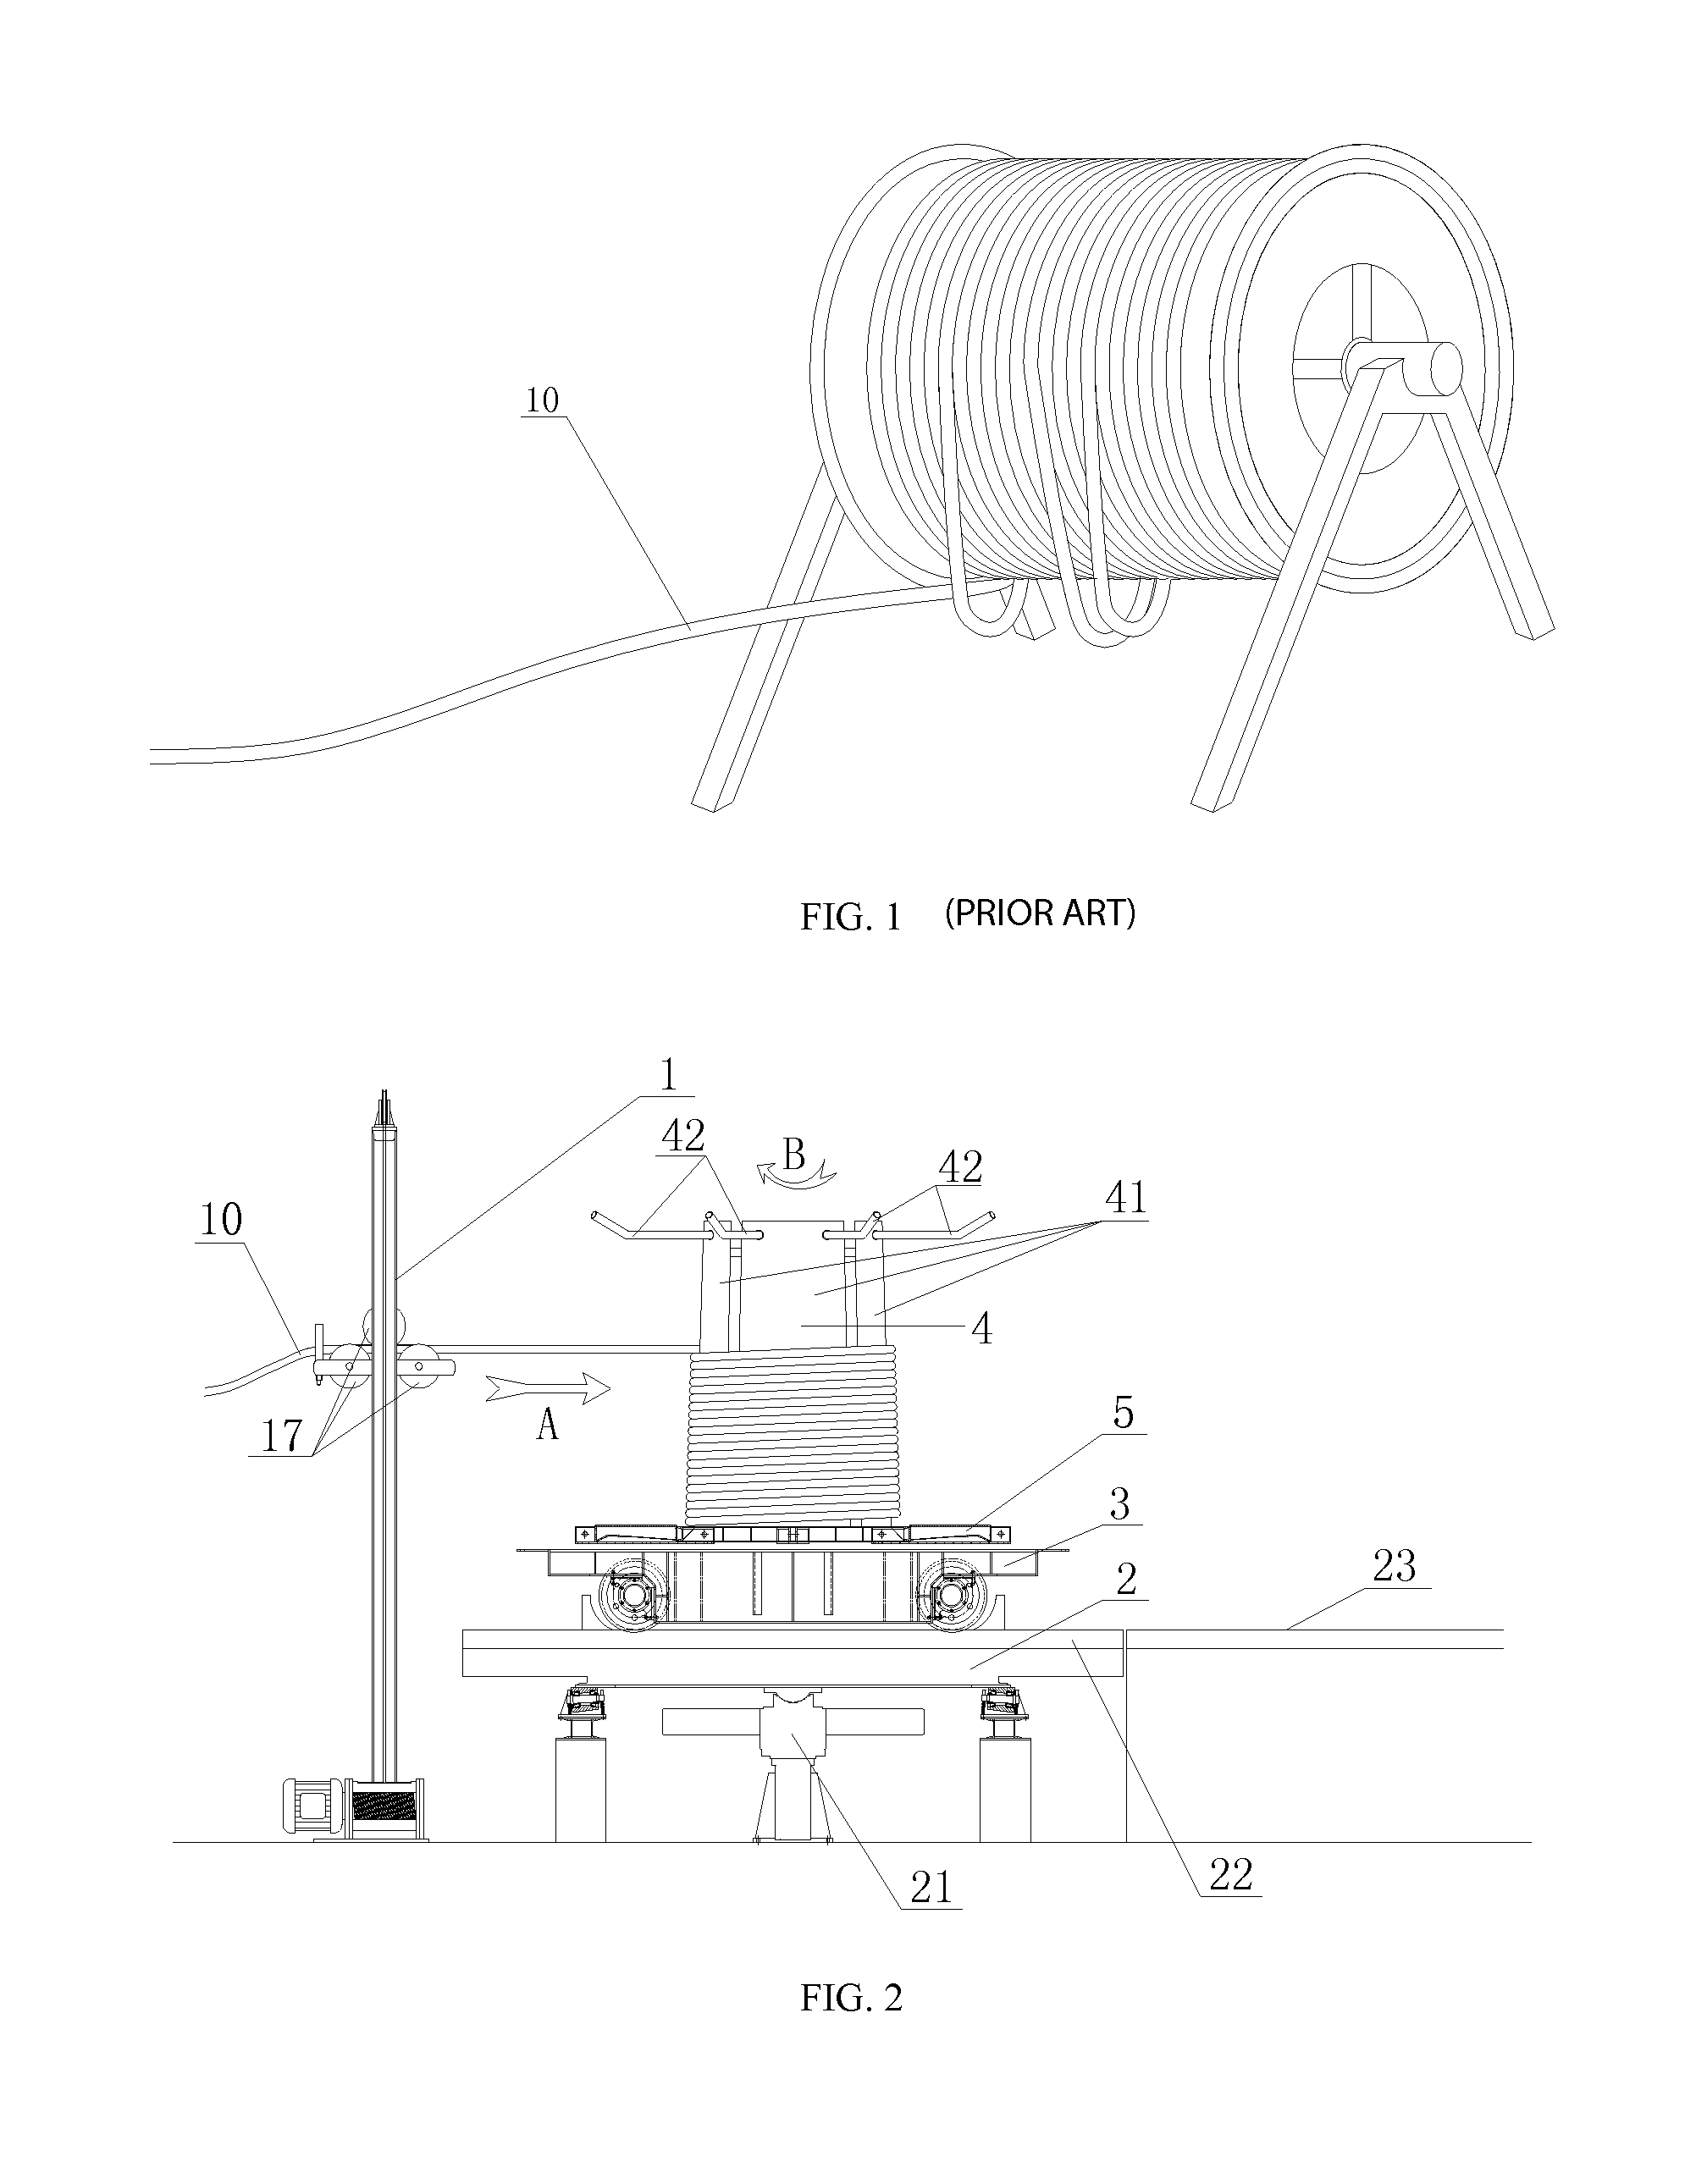 Method for Horizontally Winding and Unwinding a Parallel Wire Strand